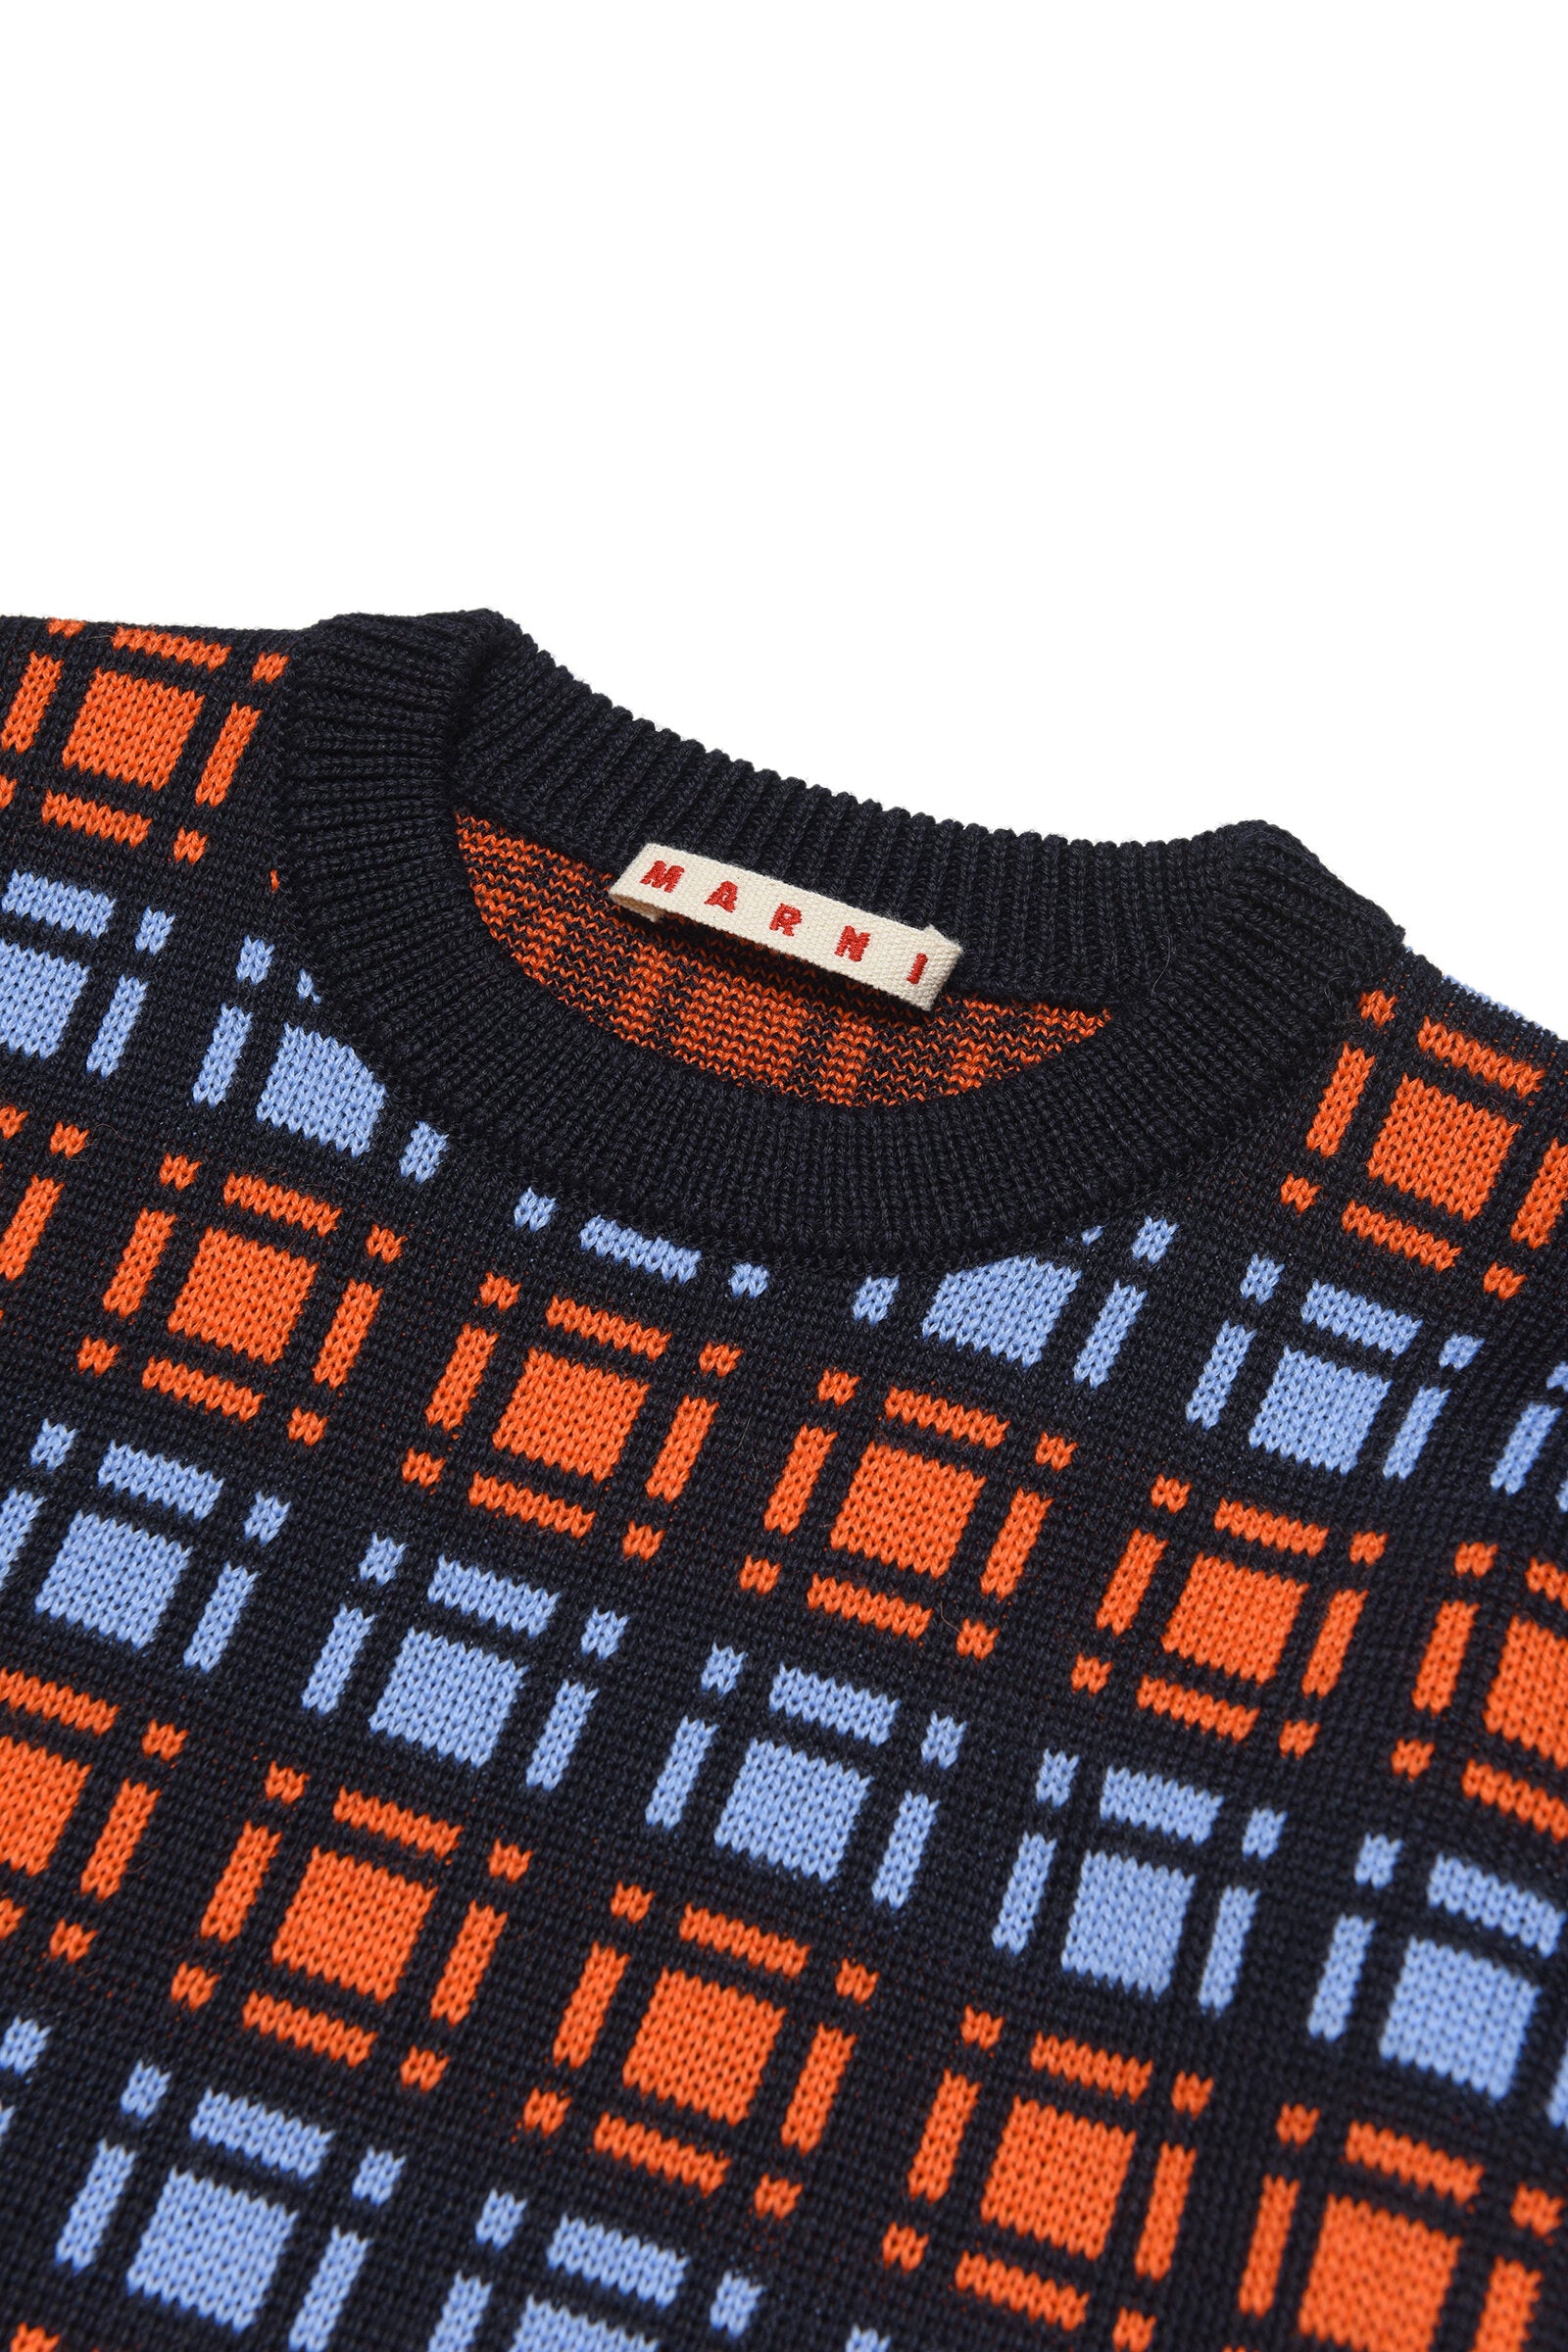 Crew-neck sweater in mixed allover Check pattern